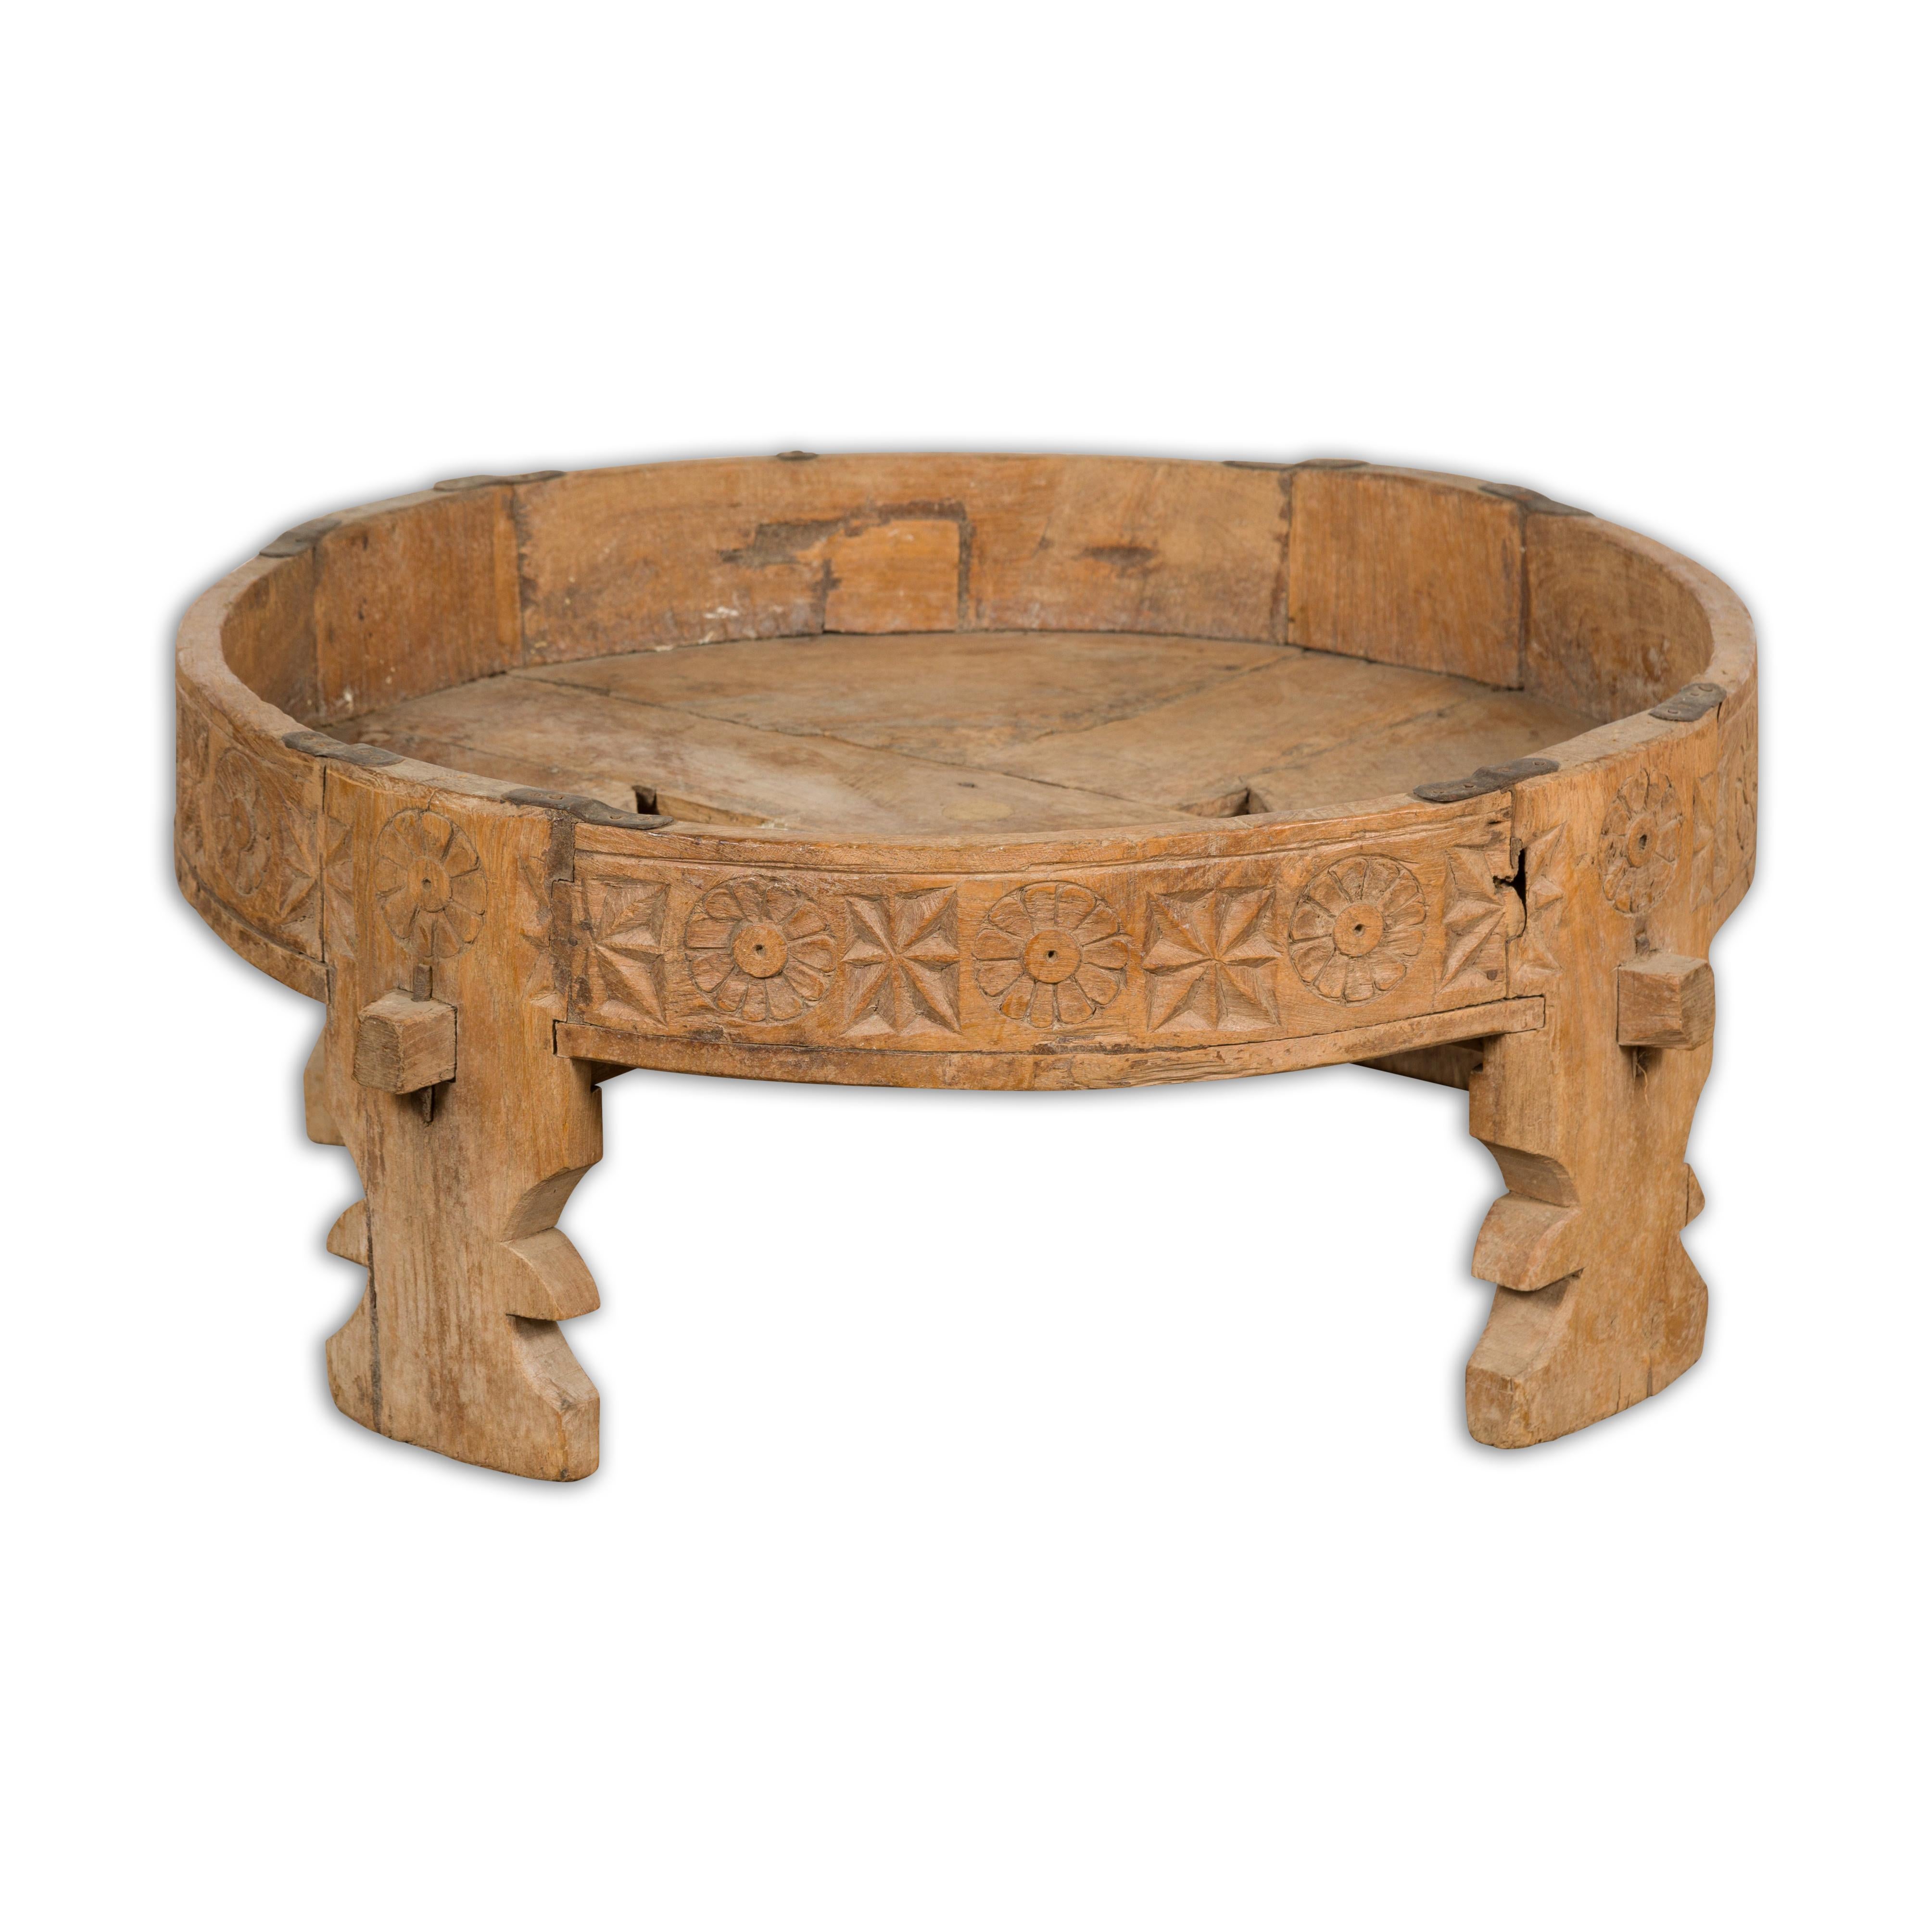 Indian 1920s Teak Chakki Grinding Table with Hand-Carved Geometric Décor For Sale 9